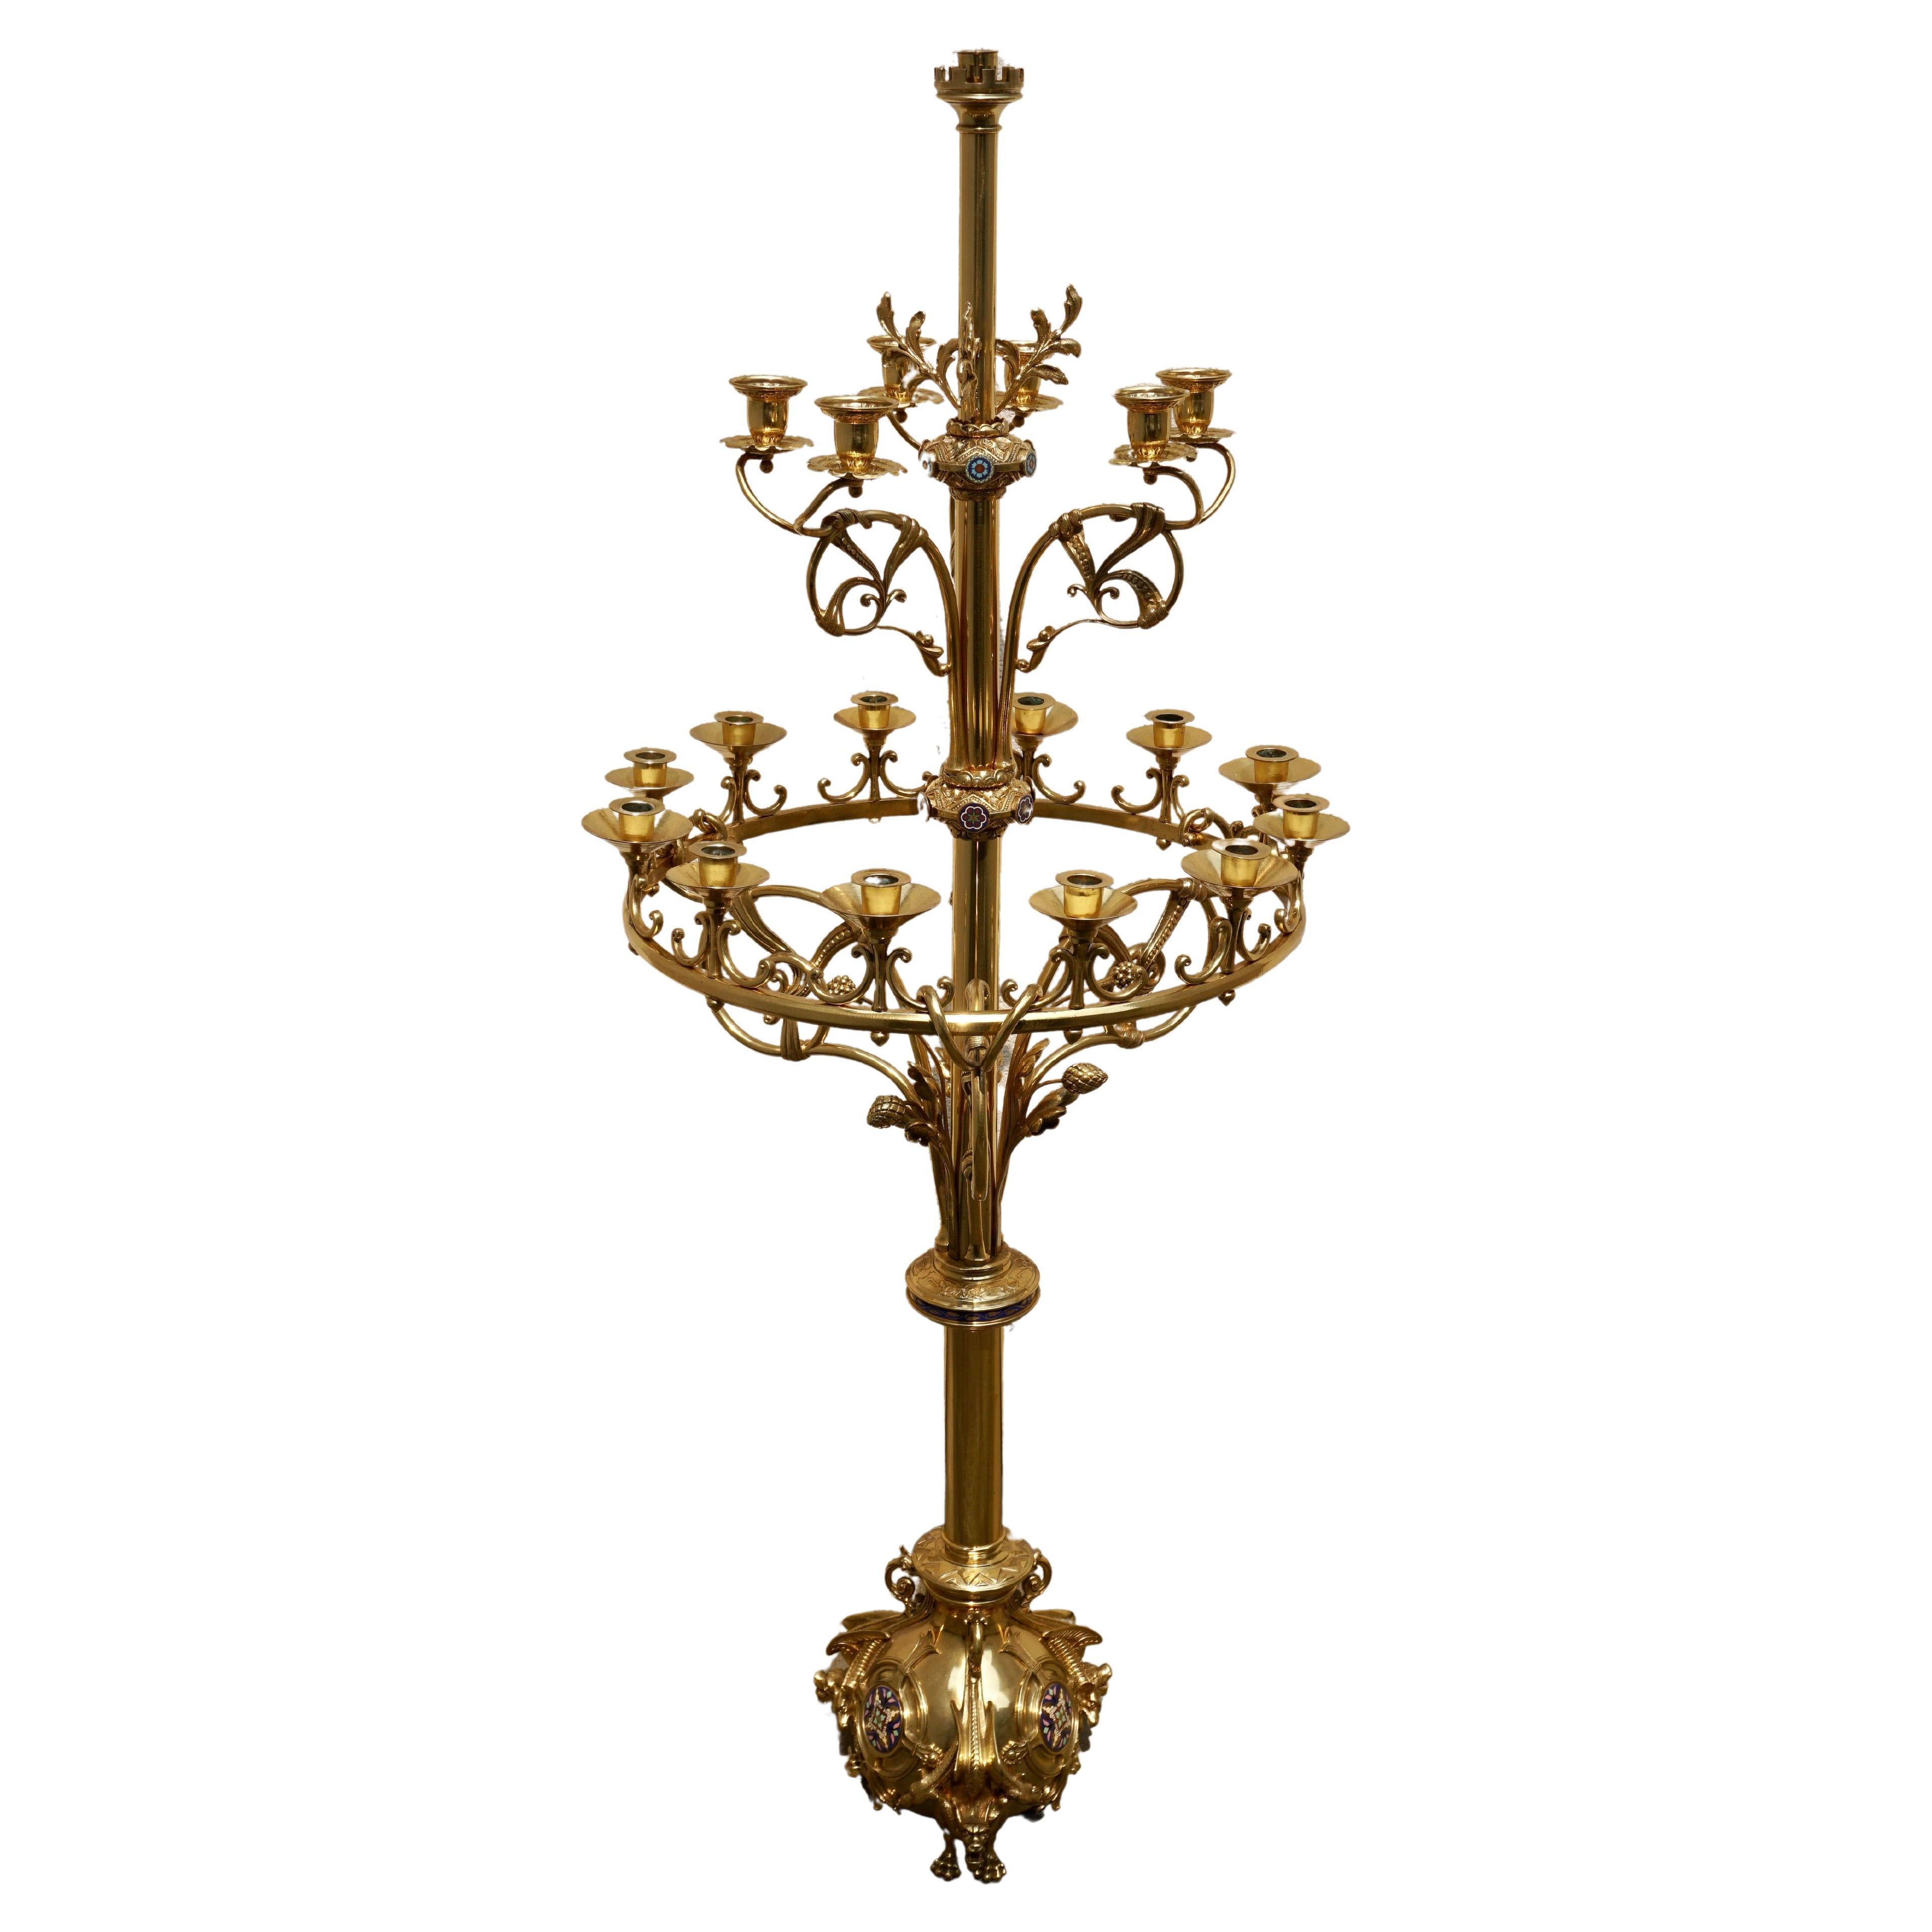 Large Church Antique Torcheres Floor Candlestick for 19 Candles